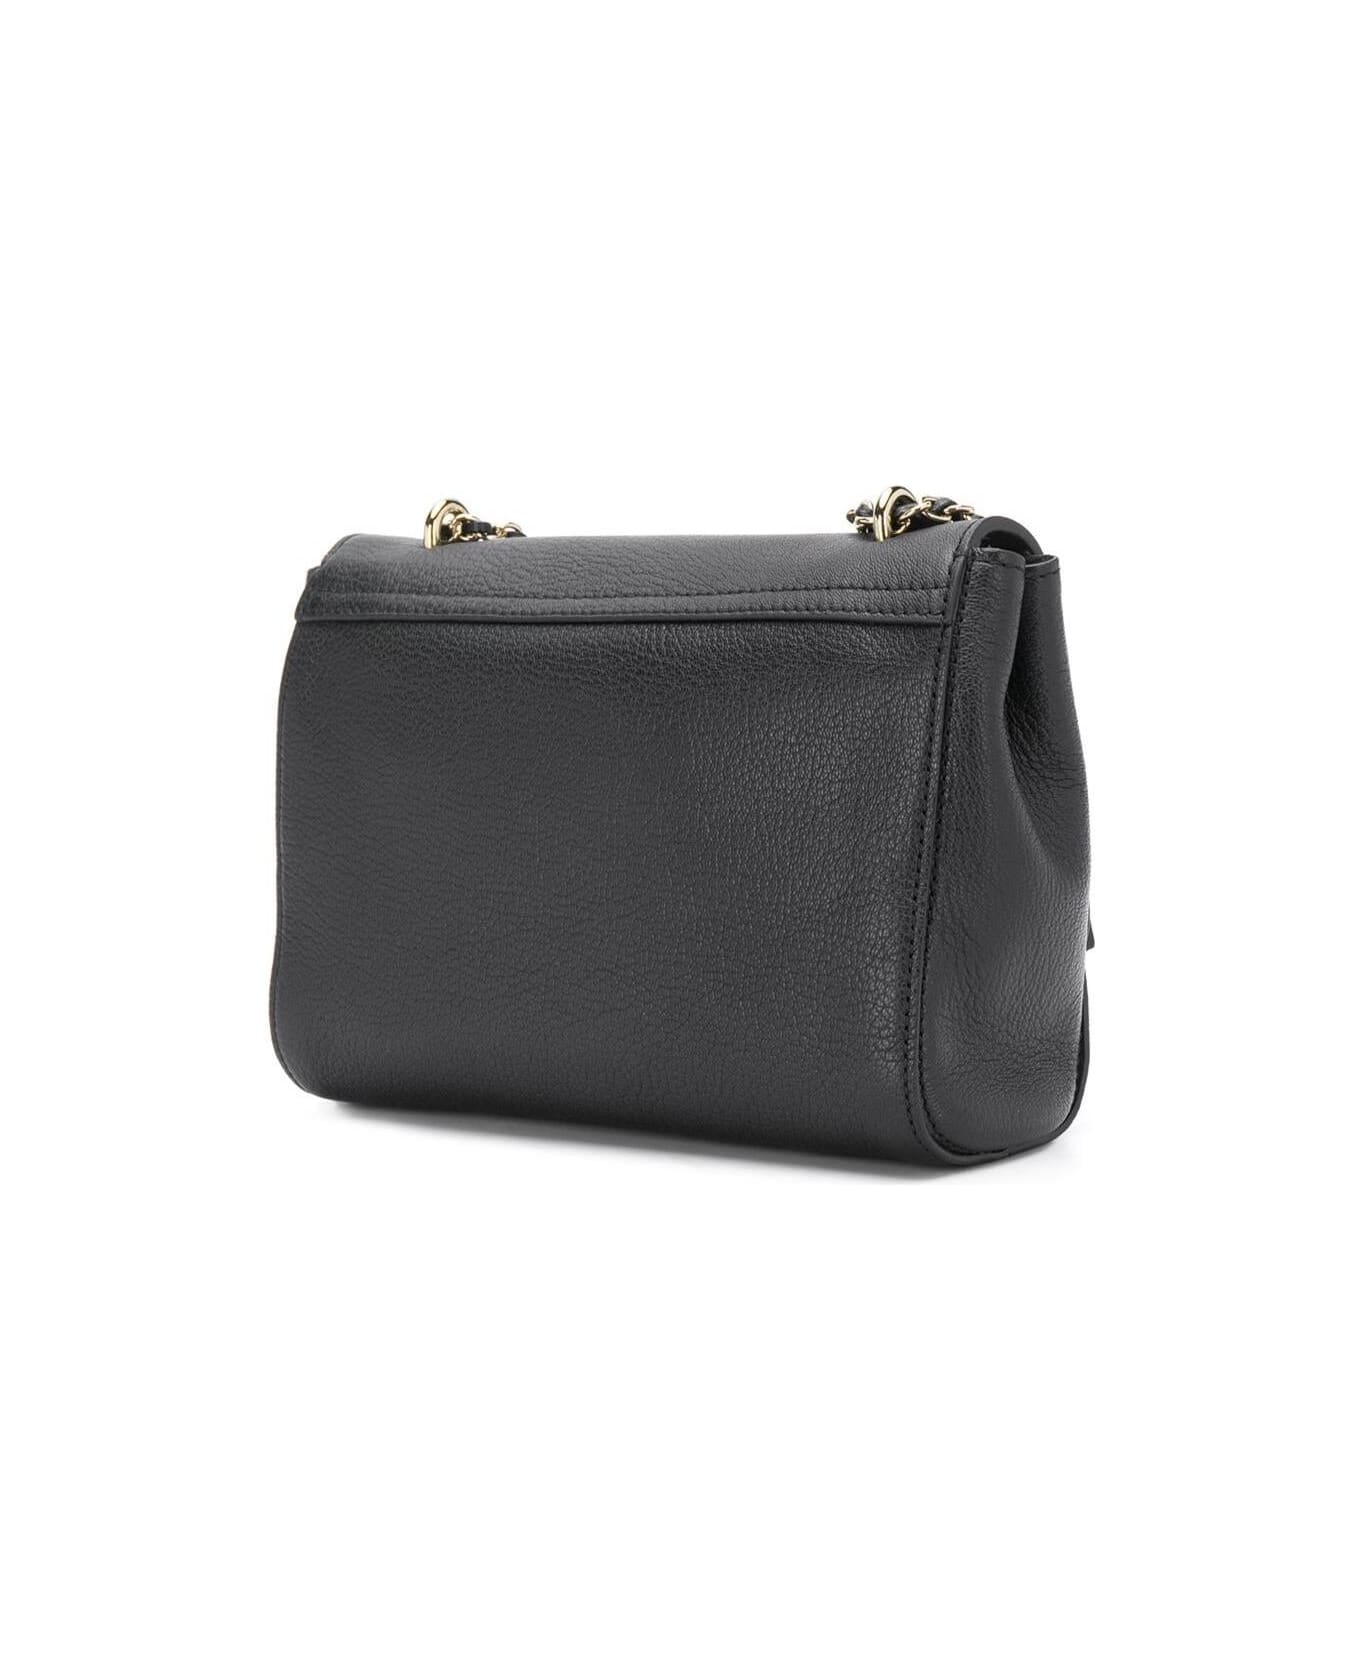 Mulberry 'lilly' Black Shoulder Bag With Twist Lock Closure In Leather Woman - Black ショルダーバッグ